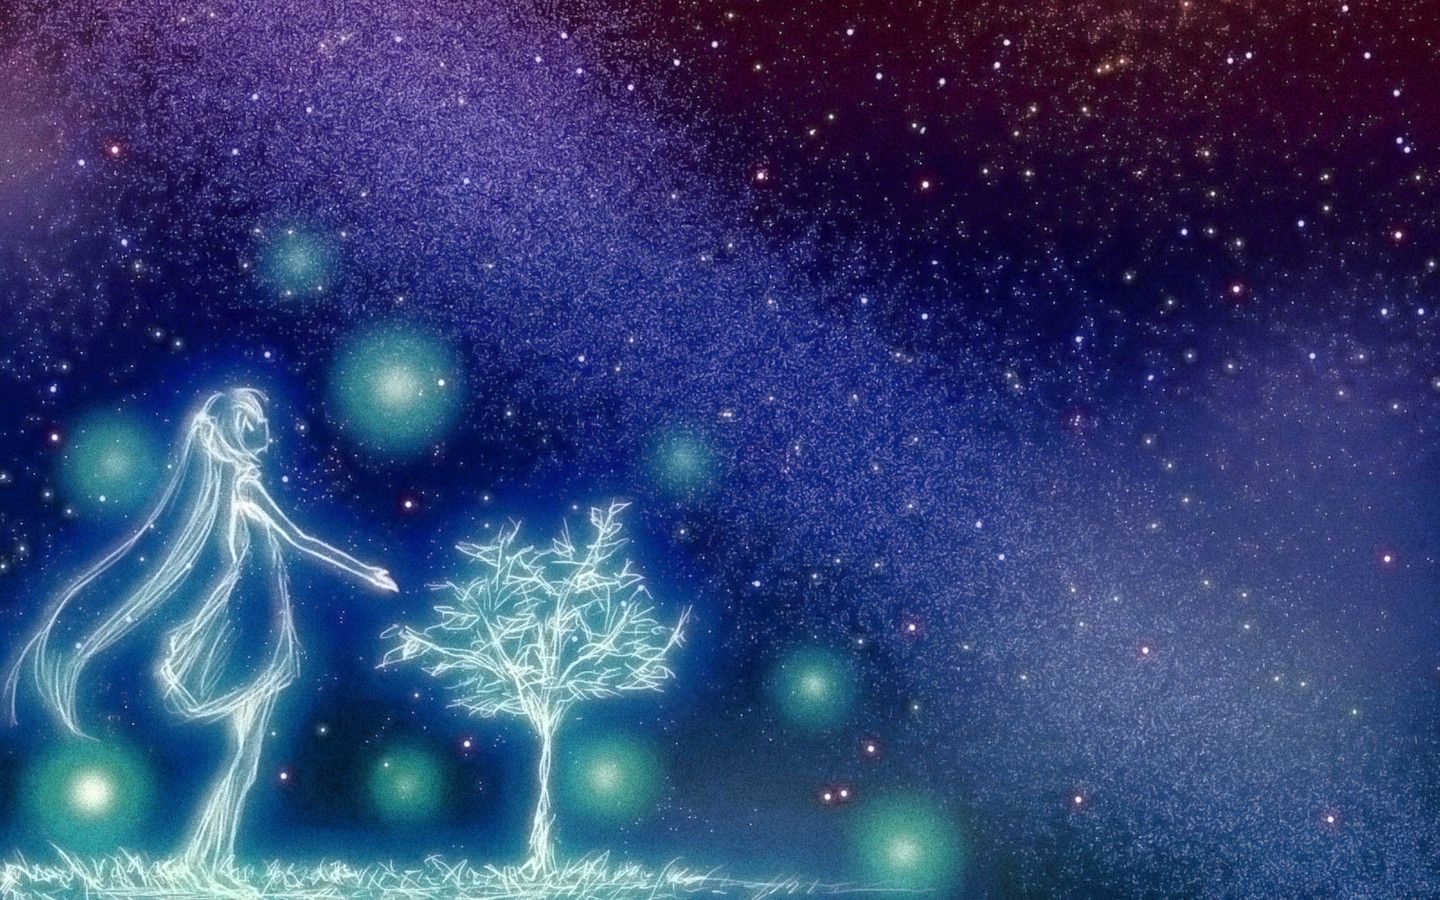 The Best 15 + Anime Wallpaper Night Sky Quality Image